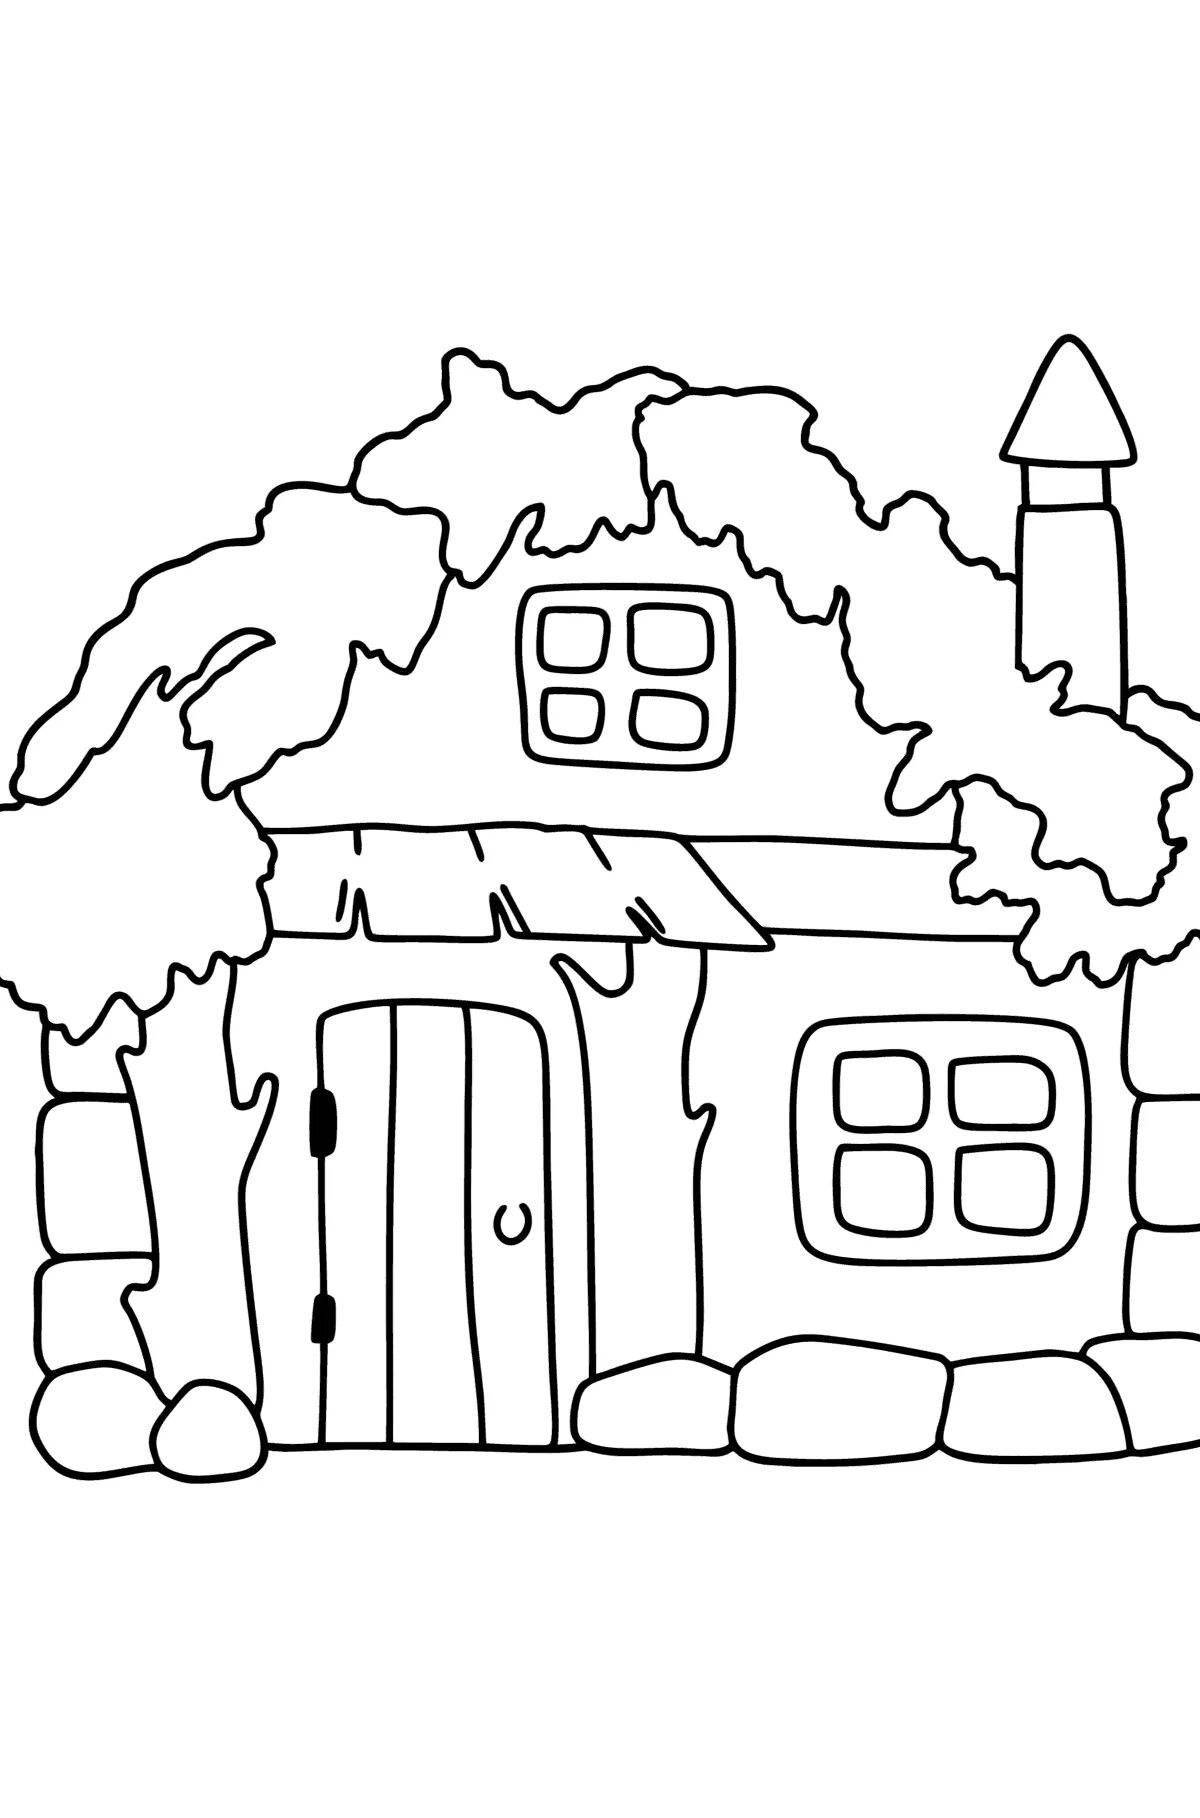 Shiny hut coloring book for kids